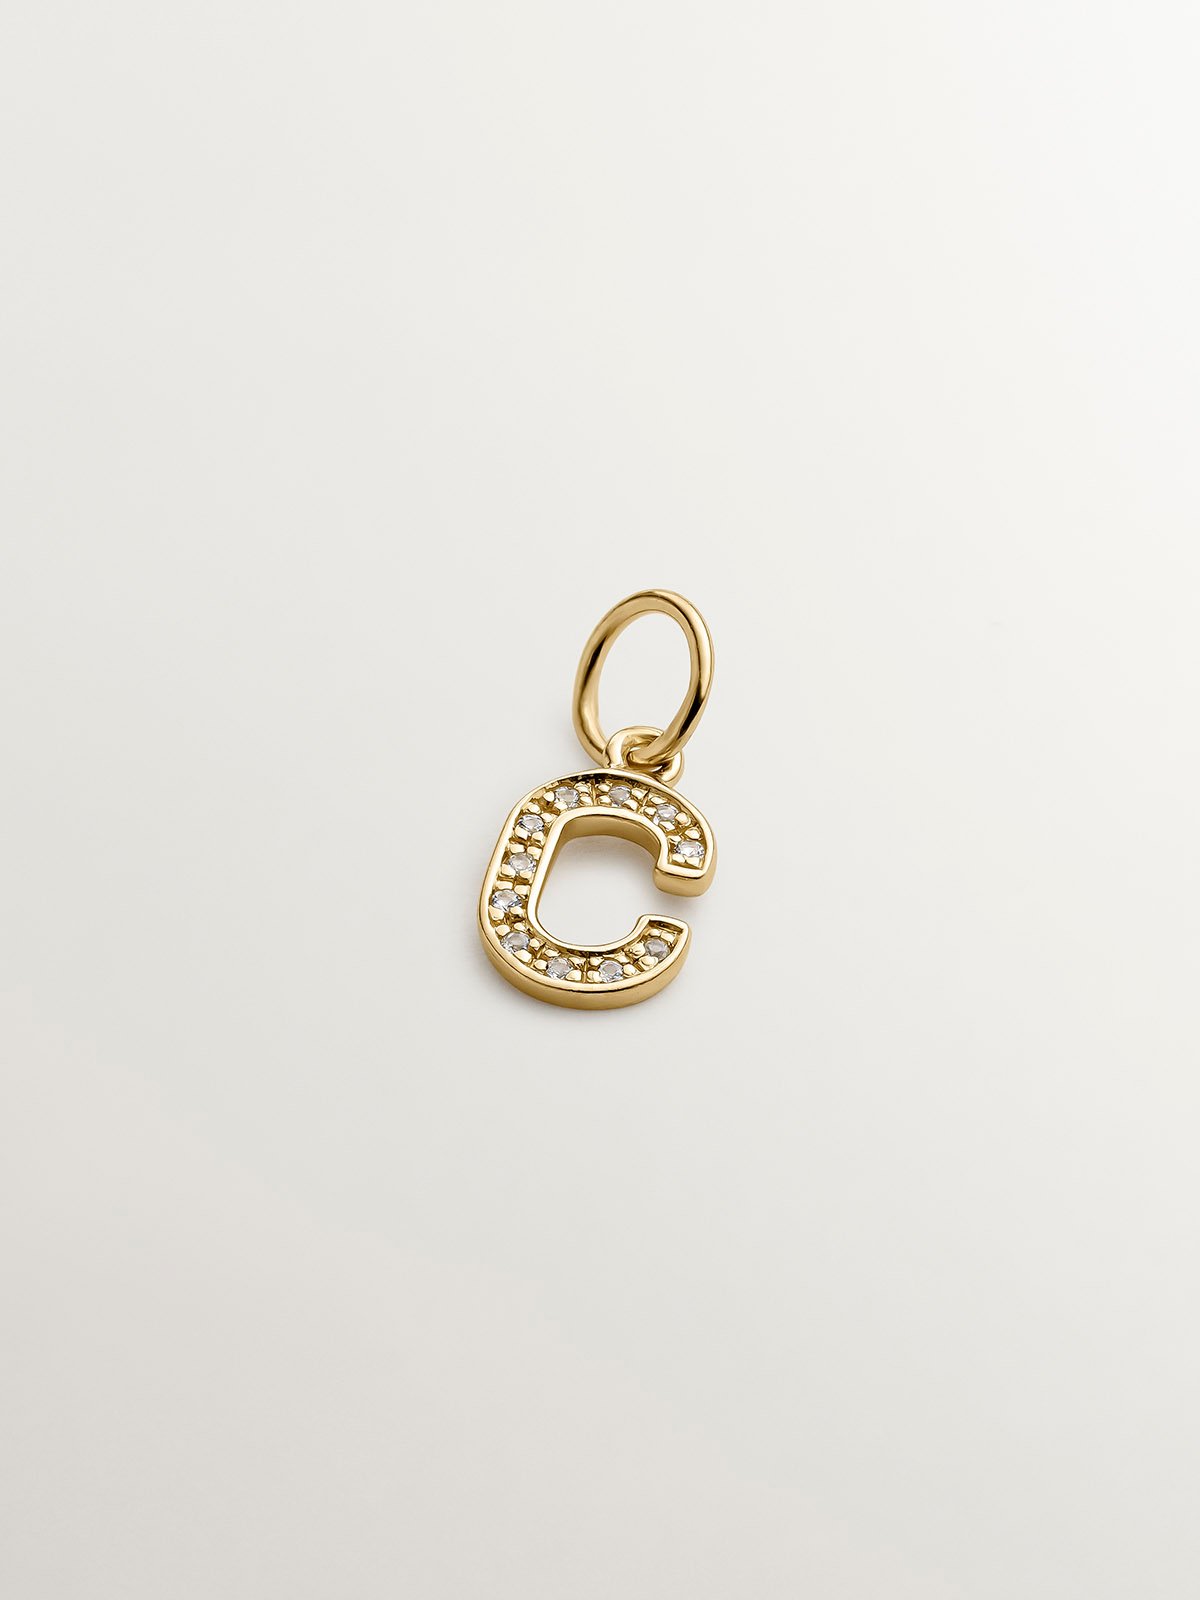 925 Silver Charm plated in 18K Yellow Gold with white topaz, initial C.